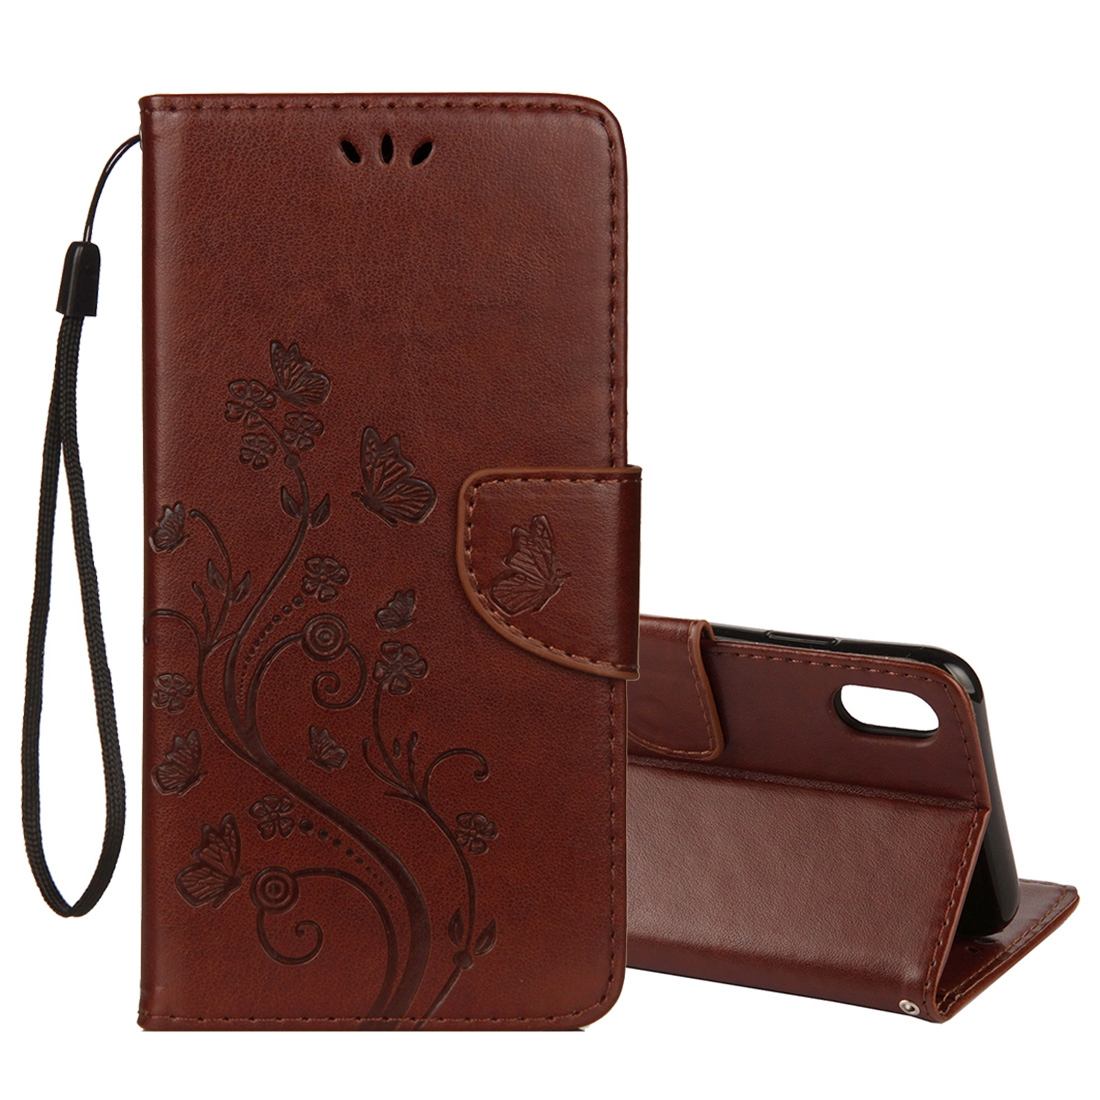 For iPhone XS MAX Case,Embossed Butterfly Flip Leather Wallet Stand Cover,Brown